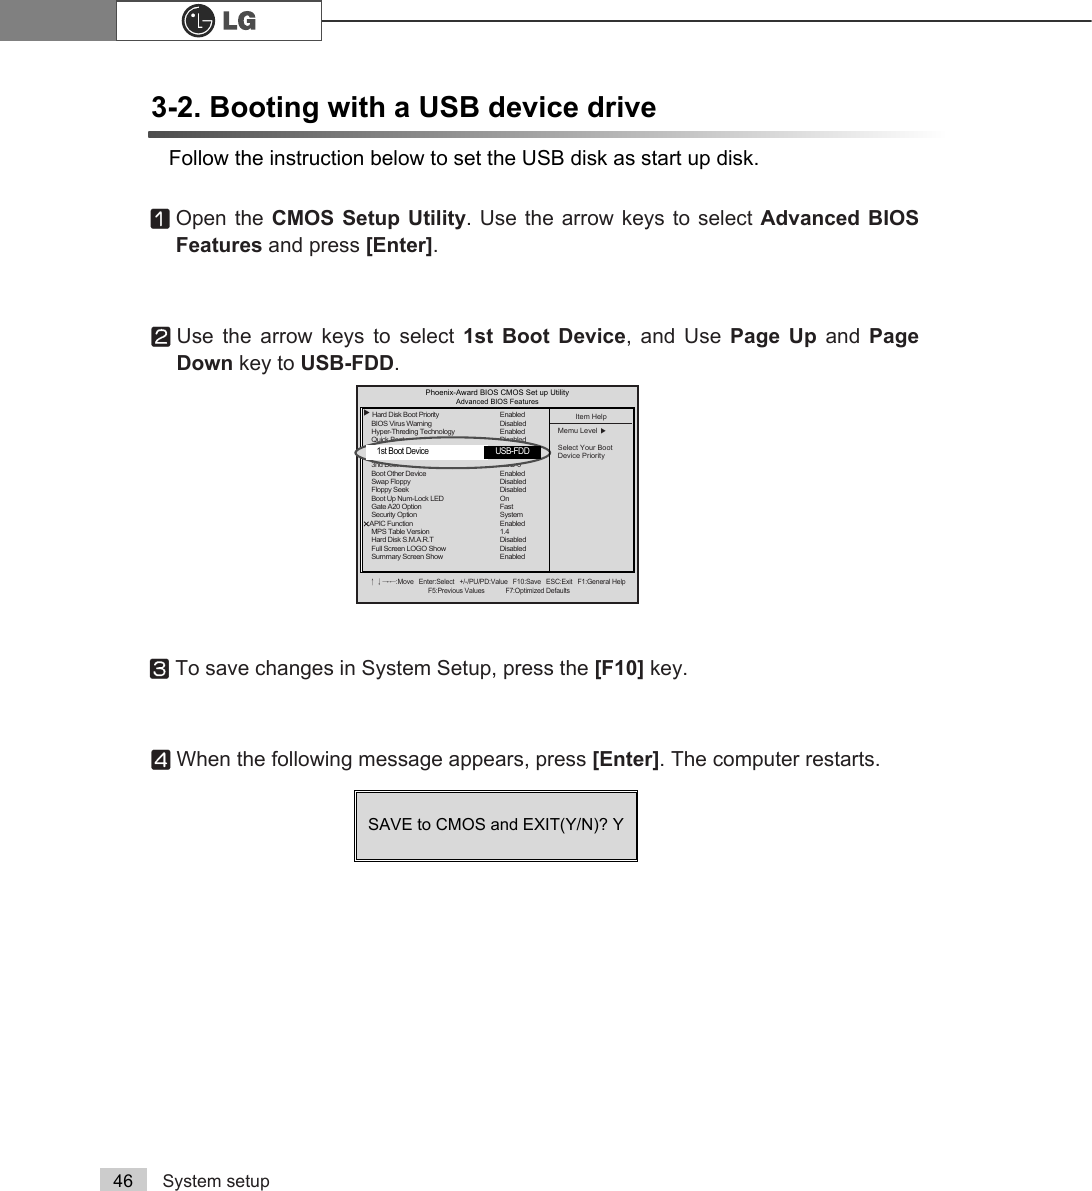 System setup463-2. Booting with a USB device driveFollow the instruction below to set the USB disk as start up disk.ⓞOpen the CMOS Setup Utility. Use the arrow keys to select Advanced BIOSFeatures and press [Enter].ⓟUse the arrow keys to select 1st Boot Device, and Use Page Up and  PageDown key to USB-FDD.ⓠTo save changes in System Setup, press the [F10] key.ⓡWhen the following message appears, press [Enter]. The computer restarts.SAVE to CMOS and EXIT(Y/N)? Y Phoenix-Award BIOS CMOS Set up UtilityAdvanced BIOS Featuresêëèé:Move   Enter:Select   +/-/PU/PD:Value   F10:Save   ESC:Exit   F1:General HelpF5:Previous Values            F7:Optimized DefaultsĚHard Disk Boot Priority Enabled BIOS Virus WarningDisabledHyper-Threding Technology EnabledQuick Boot Disabled 1st Boot Device CDROM2nd Boot Device Floppy3nd Boot Device HDD-0Boot Other Device EnabledSwap Floppy DisabledFloppy Seek DisabledBoot Up Num-Lock LED OnGate A20 Option FastSecurity Option SystemÁÁAPIC Function EnabledMPS Table Version 1.4Hard Disk S.M.A.R.T DisabledFull Screen LOGO Show DisabledSummary Screen Show EnabledItem HelpMemu Level ĚSelect Your Boot Device Priority1st Boot Device   USB-FDD